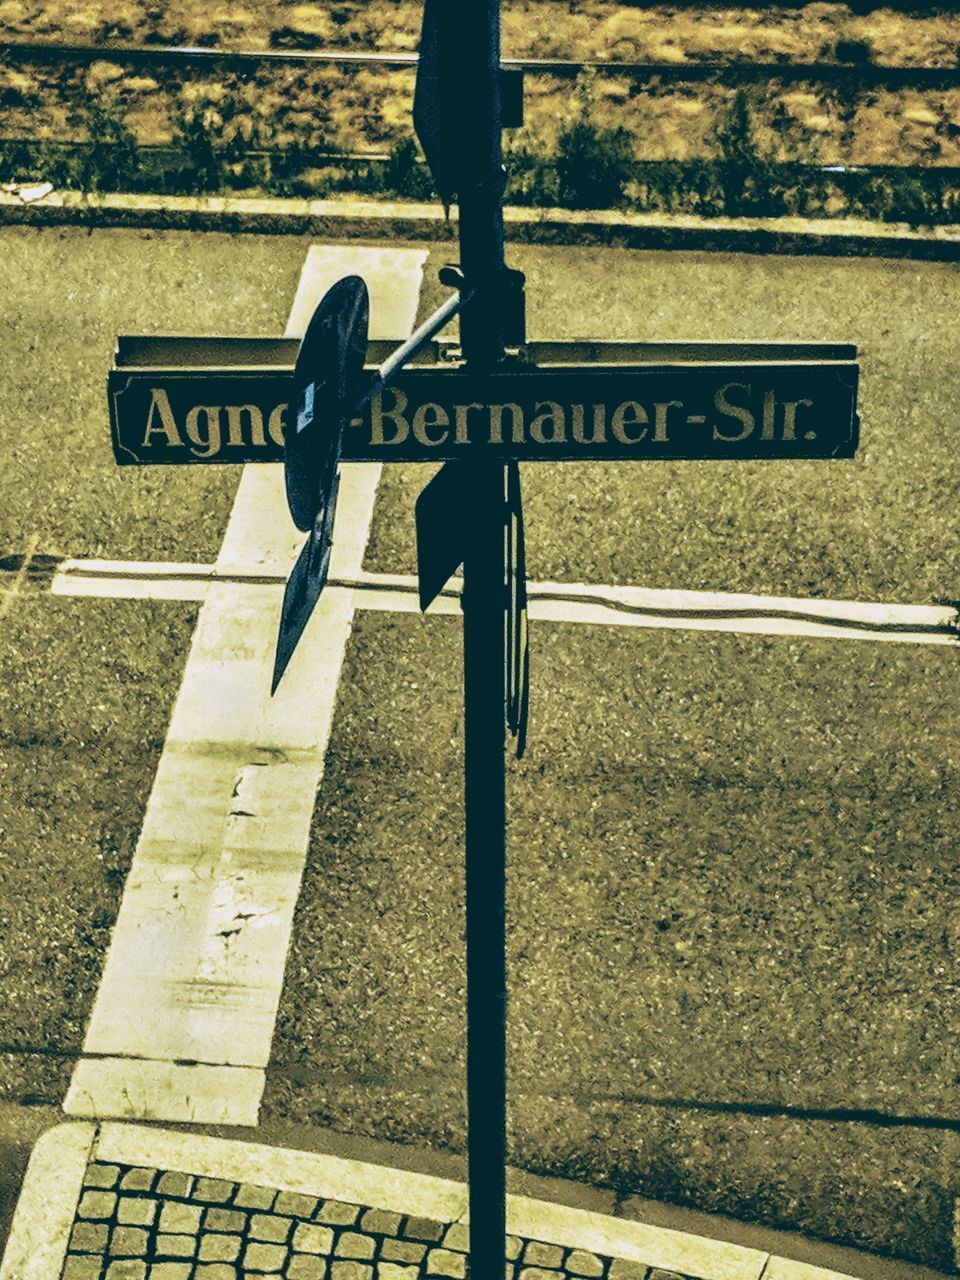 TEXT ON ROAD SIGN